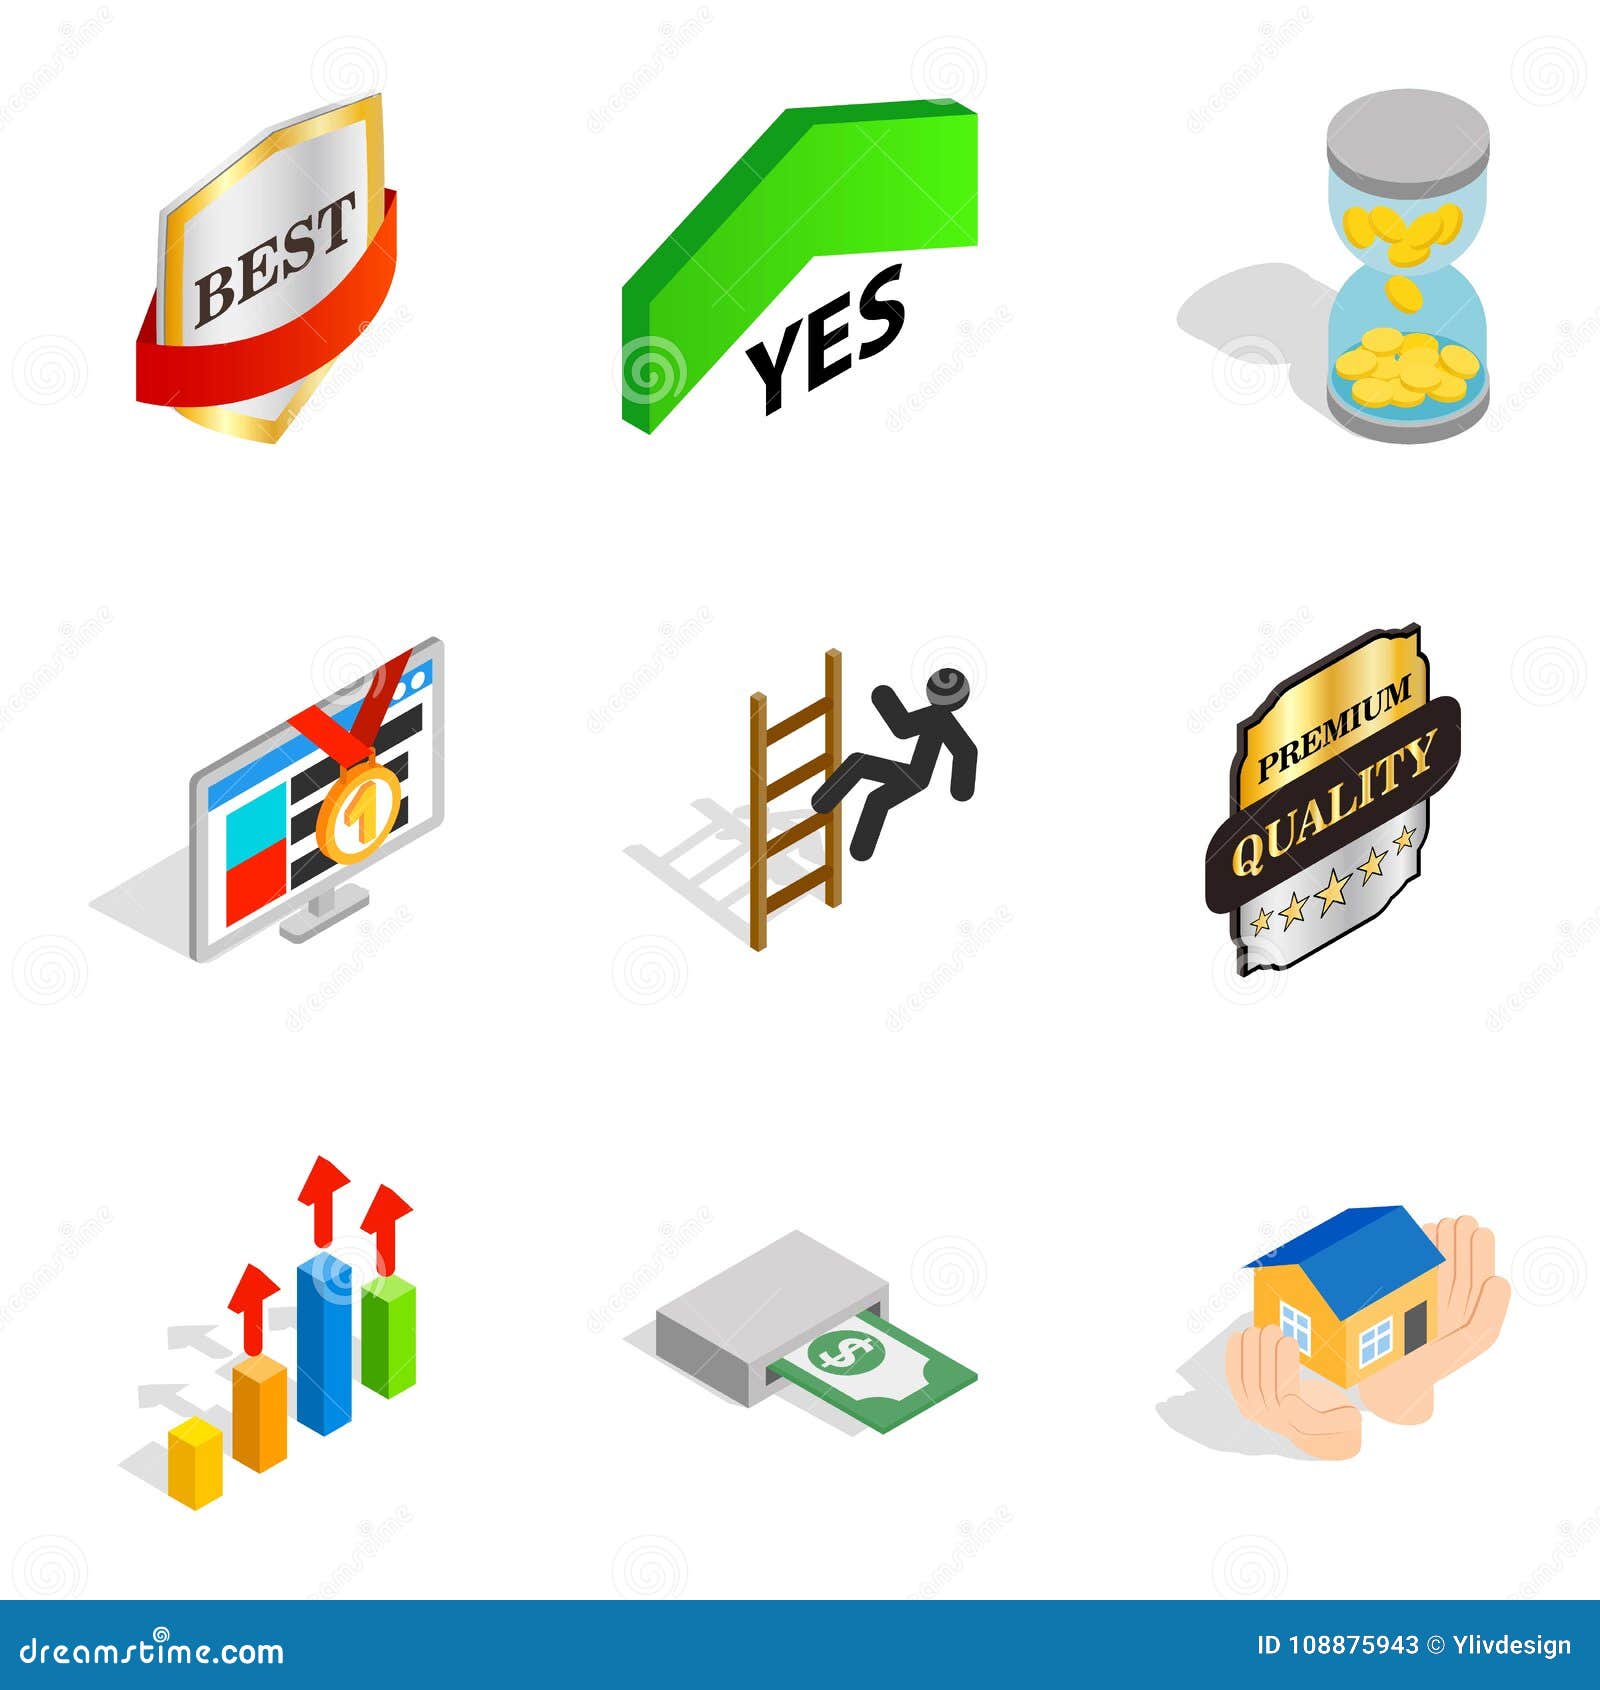 managerial position icons set, isometric style